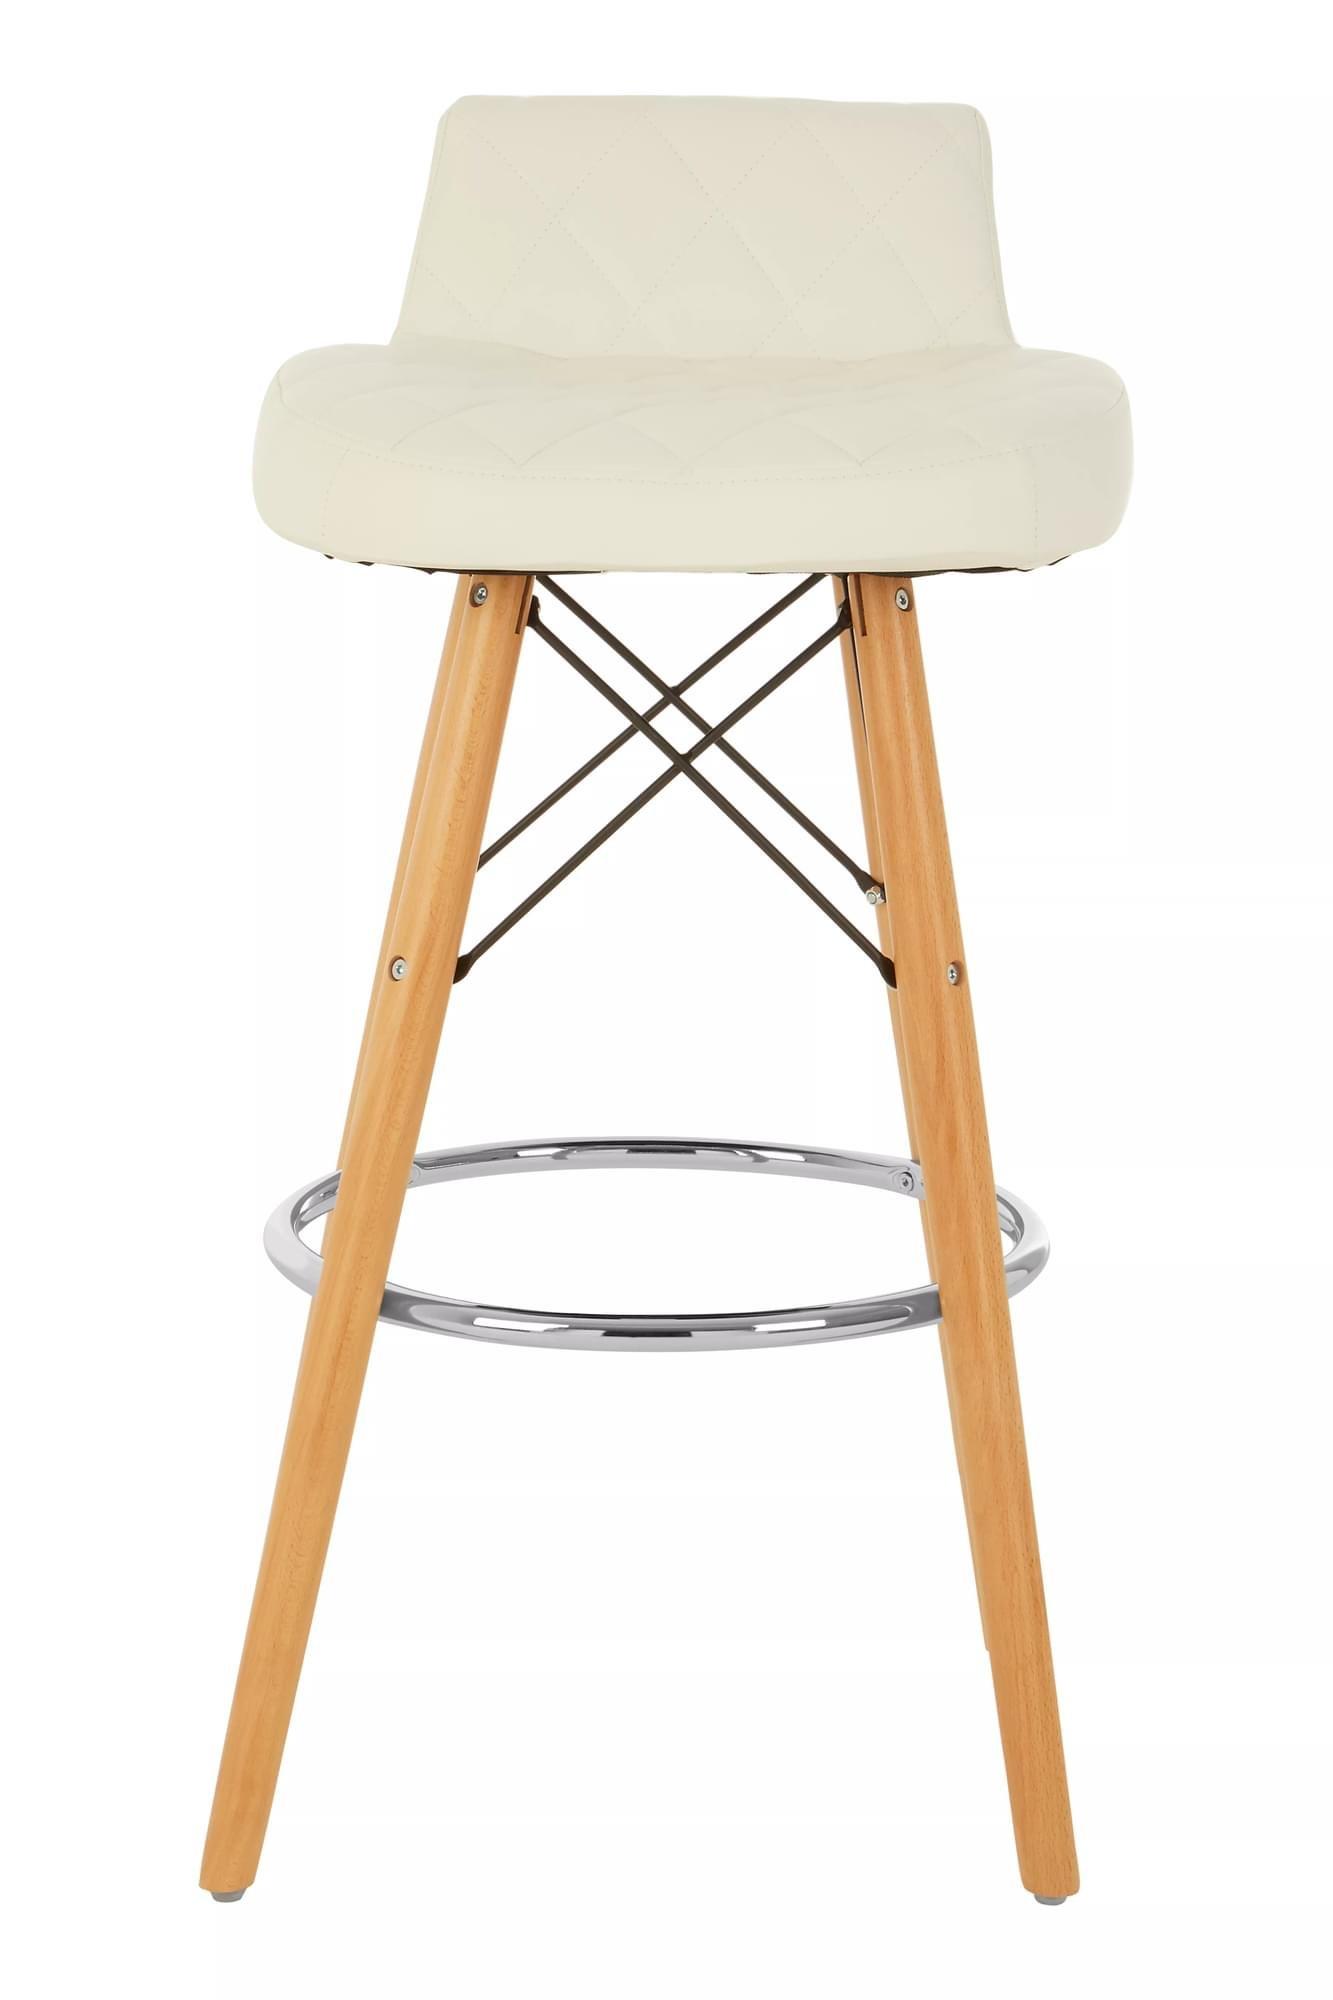 Interiors by Premier White Leather Effect Seat Bar Stool, Comfortable Seating Faux Leather Bar Stool